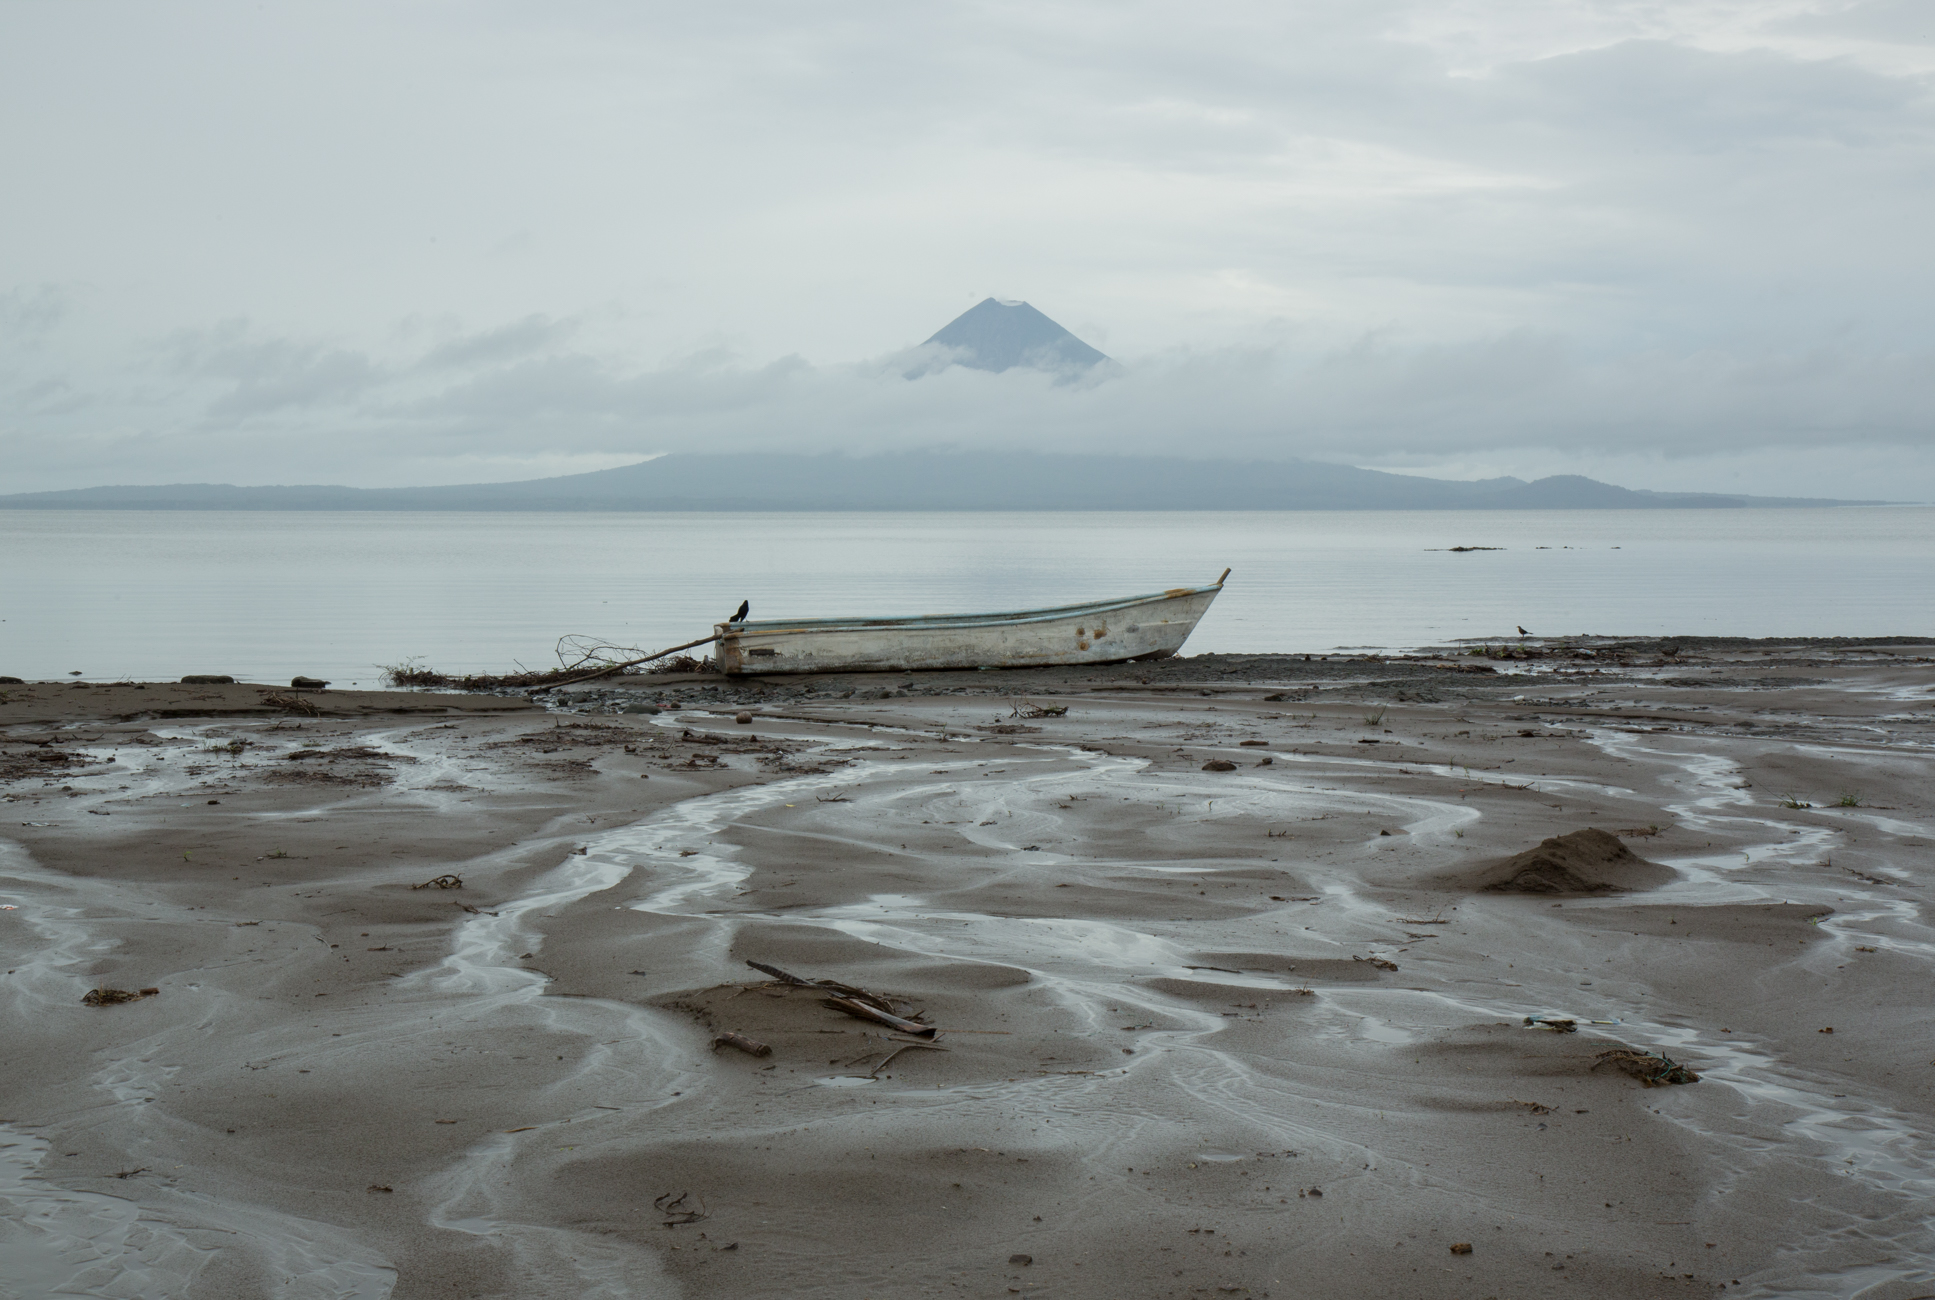  &nbsp;On the shores of Lake Nicaragua with the twin peaks of Ometepe Island in the distance near Rivas, Nicaragua&nbsp; 